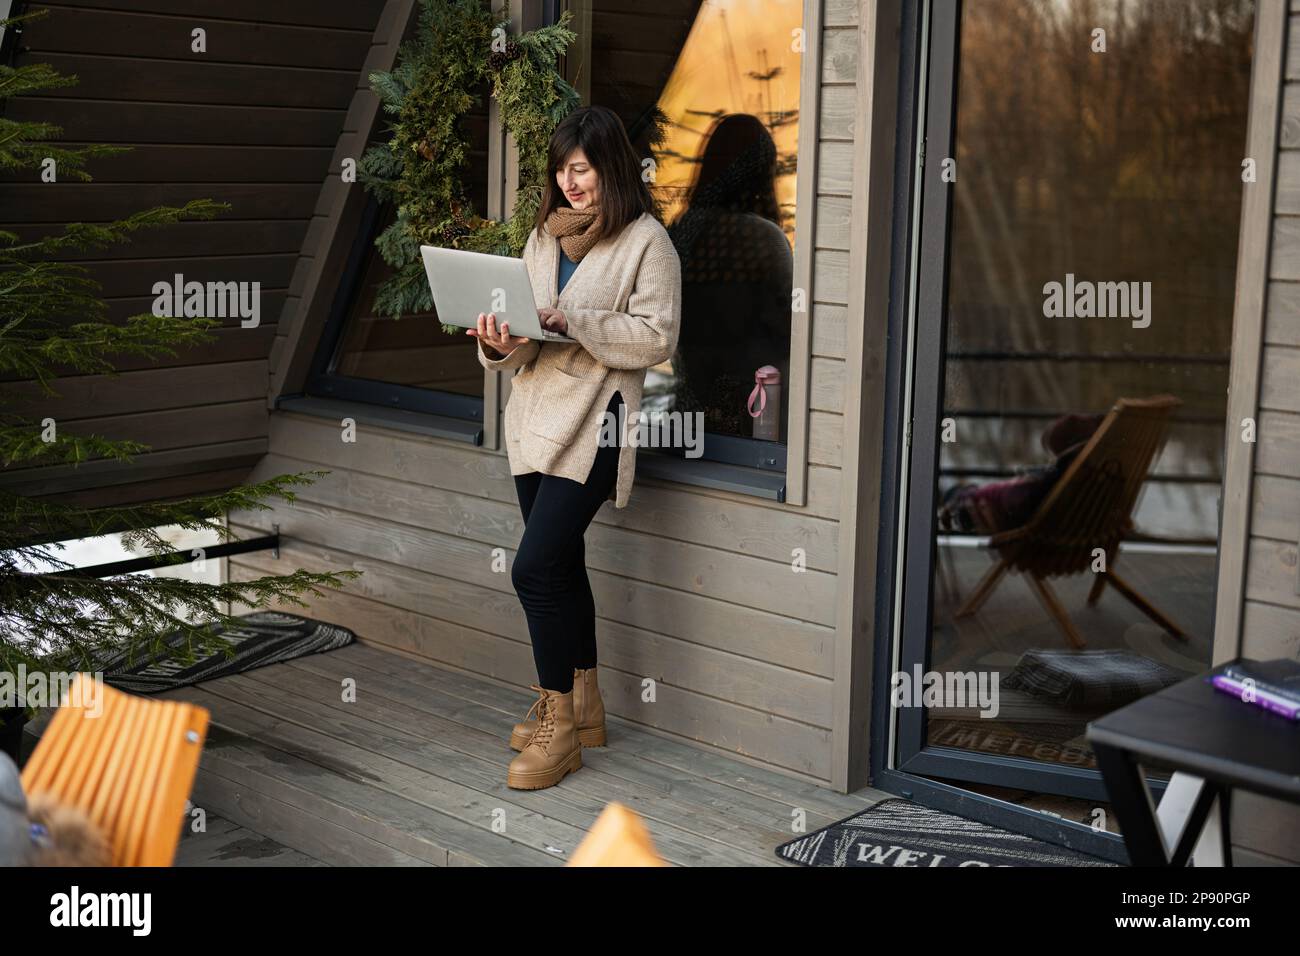 Remote work and escaping to nature concept. Woman works on laptop against tiny cabin house. Stock Photo